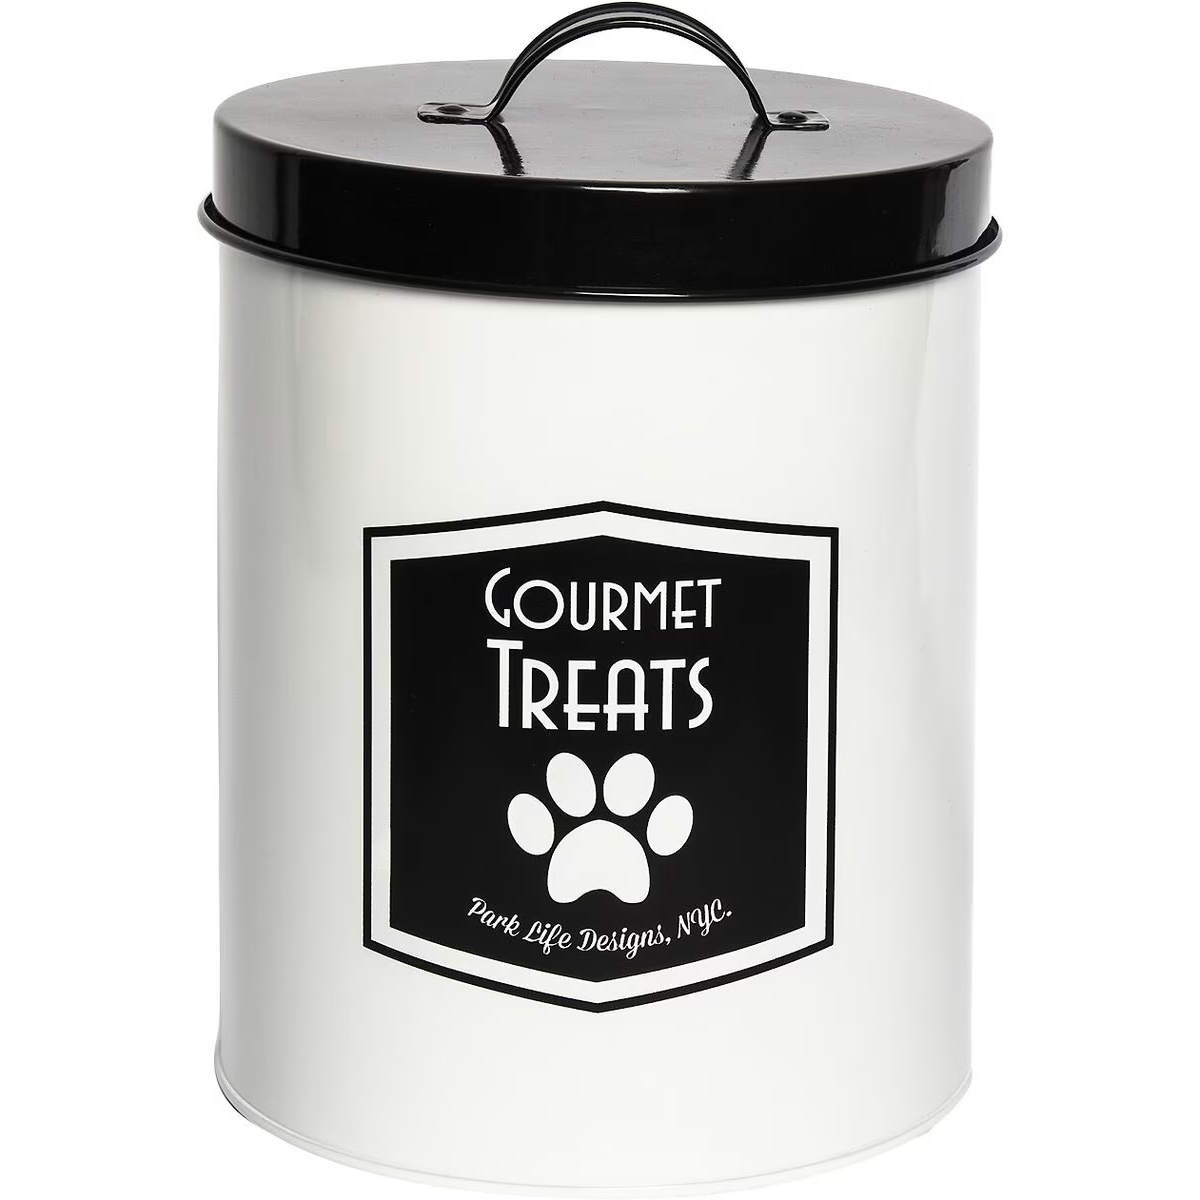 Park Life Designs Gourmet Food Storage Canister